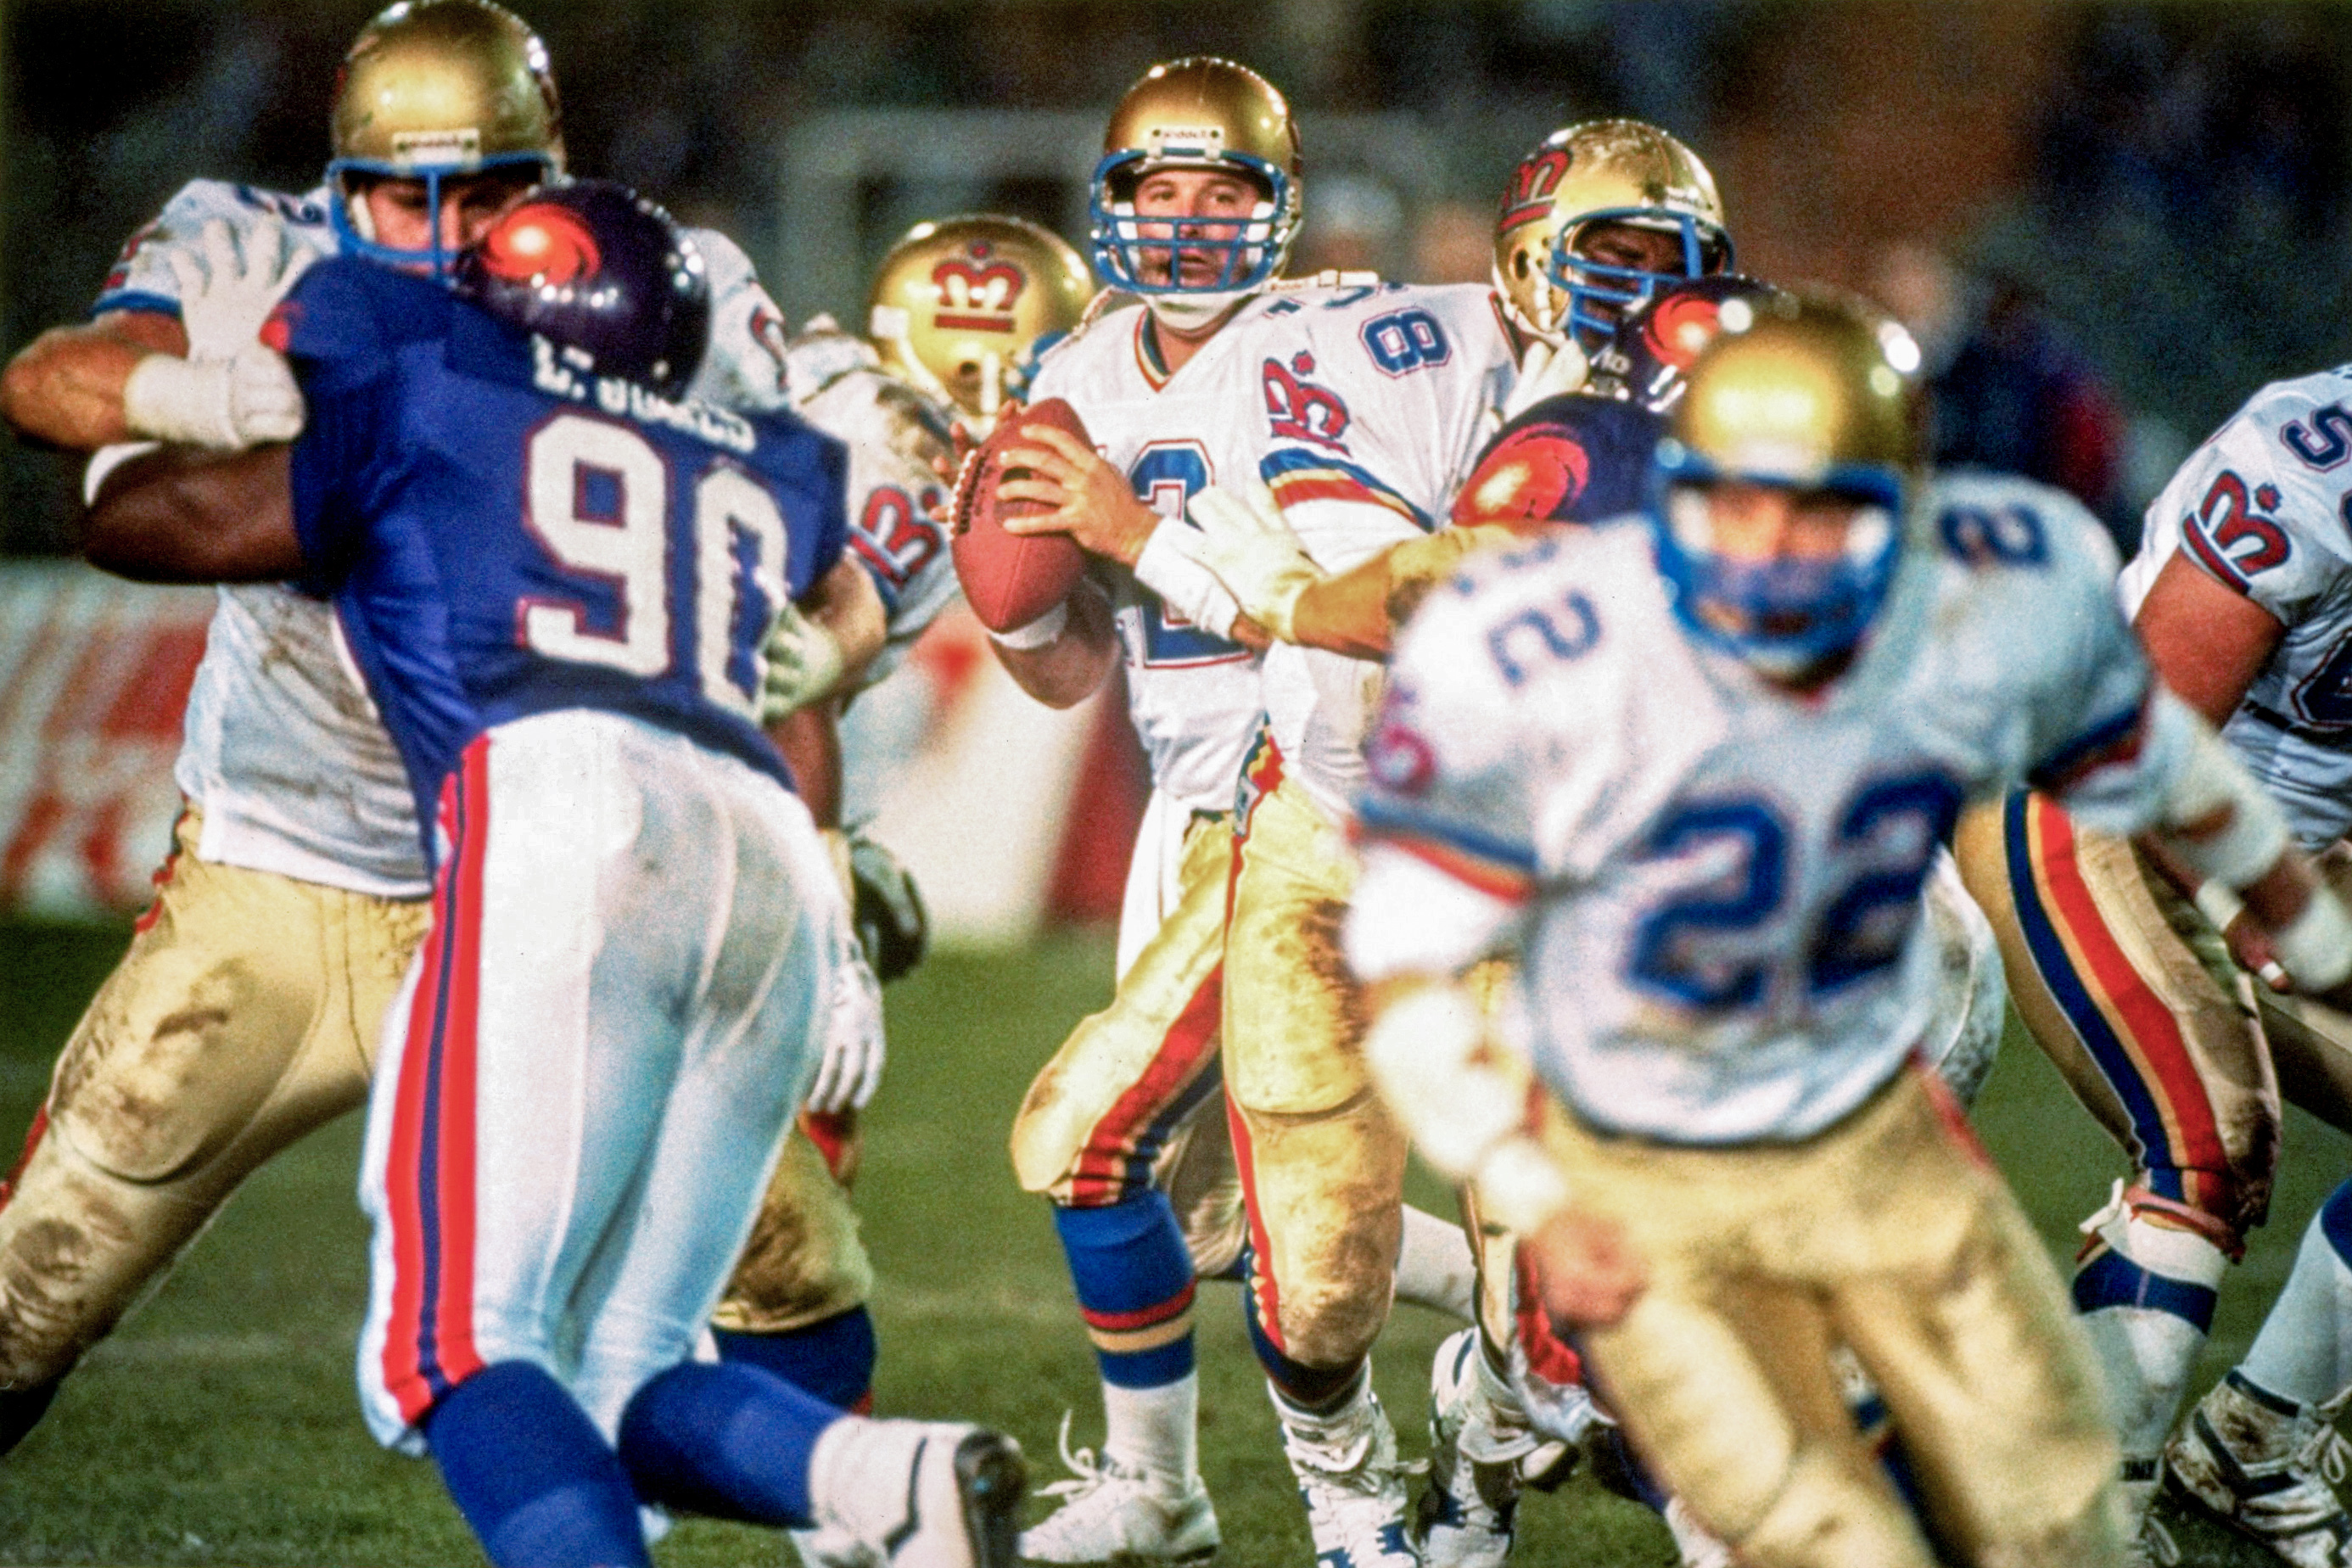 London Monarchs QB John Witkowski drops back in the pocket during a game against the Frankfurt Galaxy in 1991.